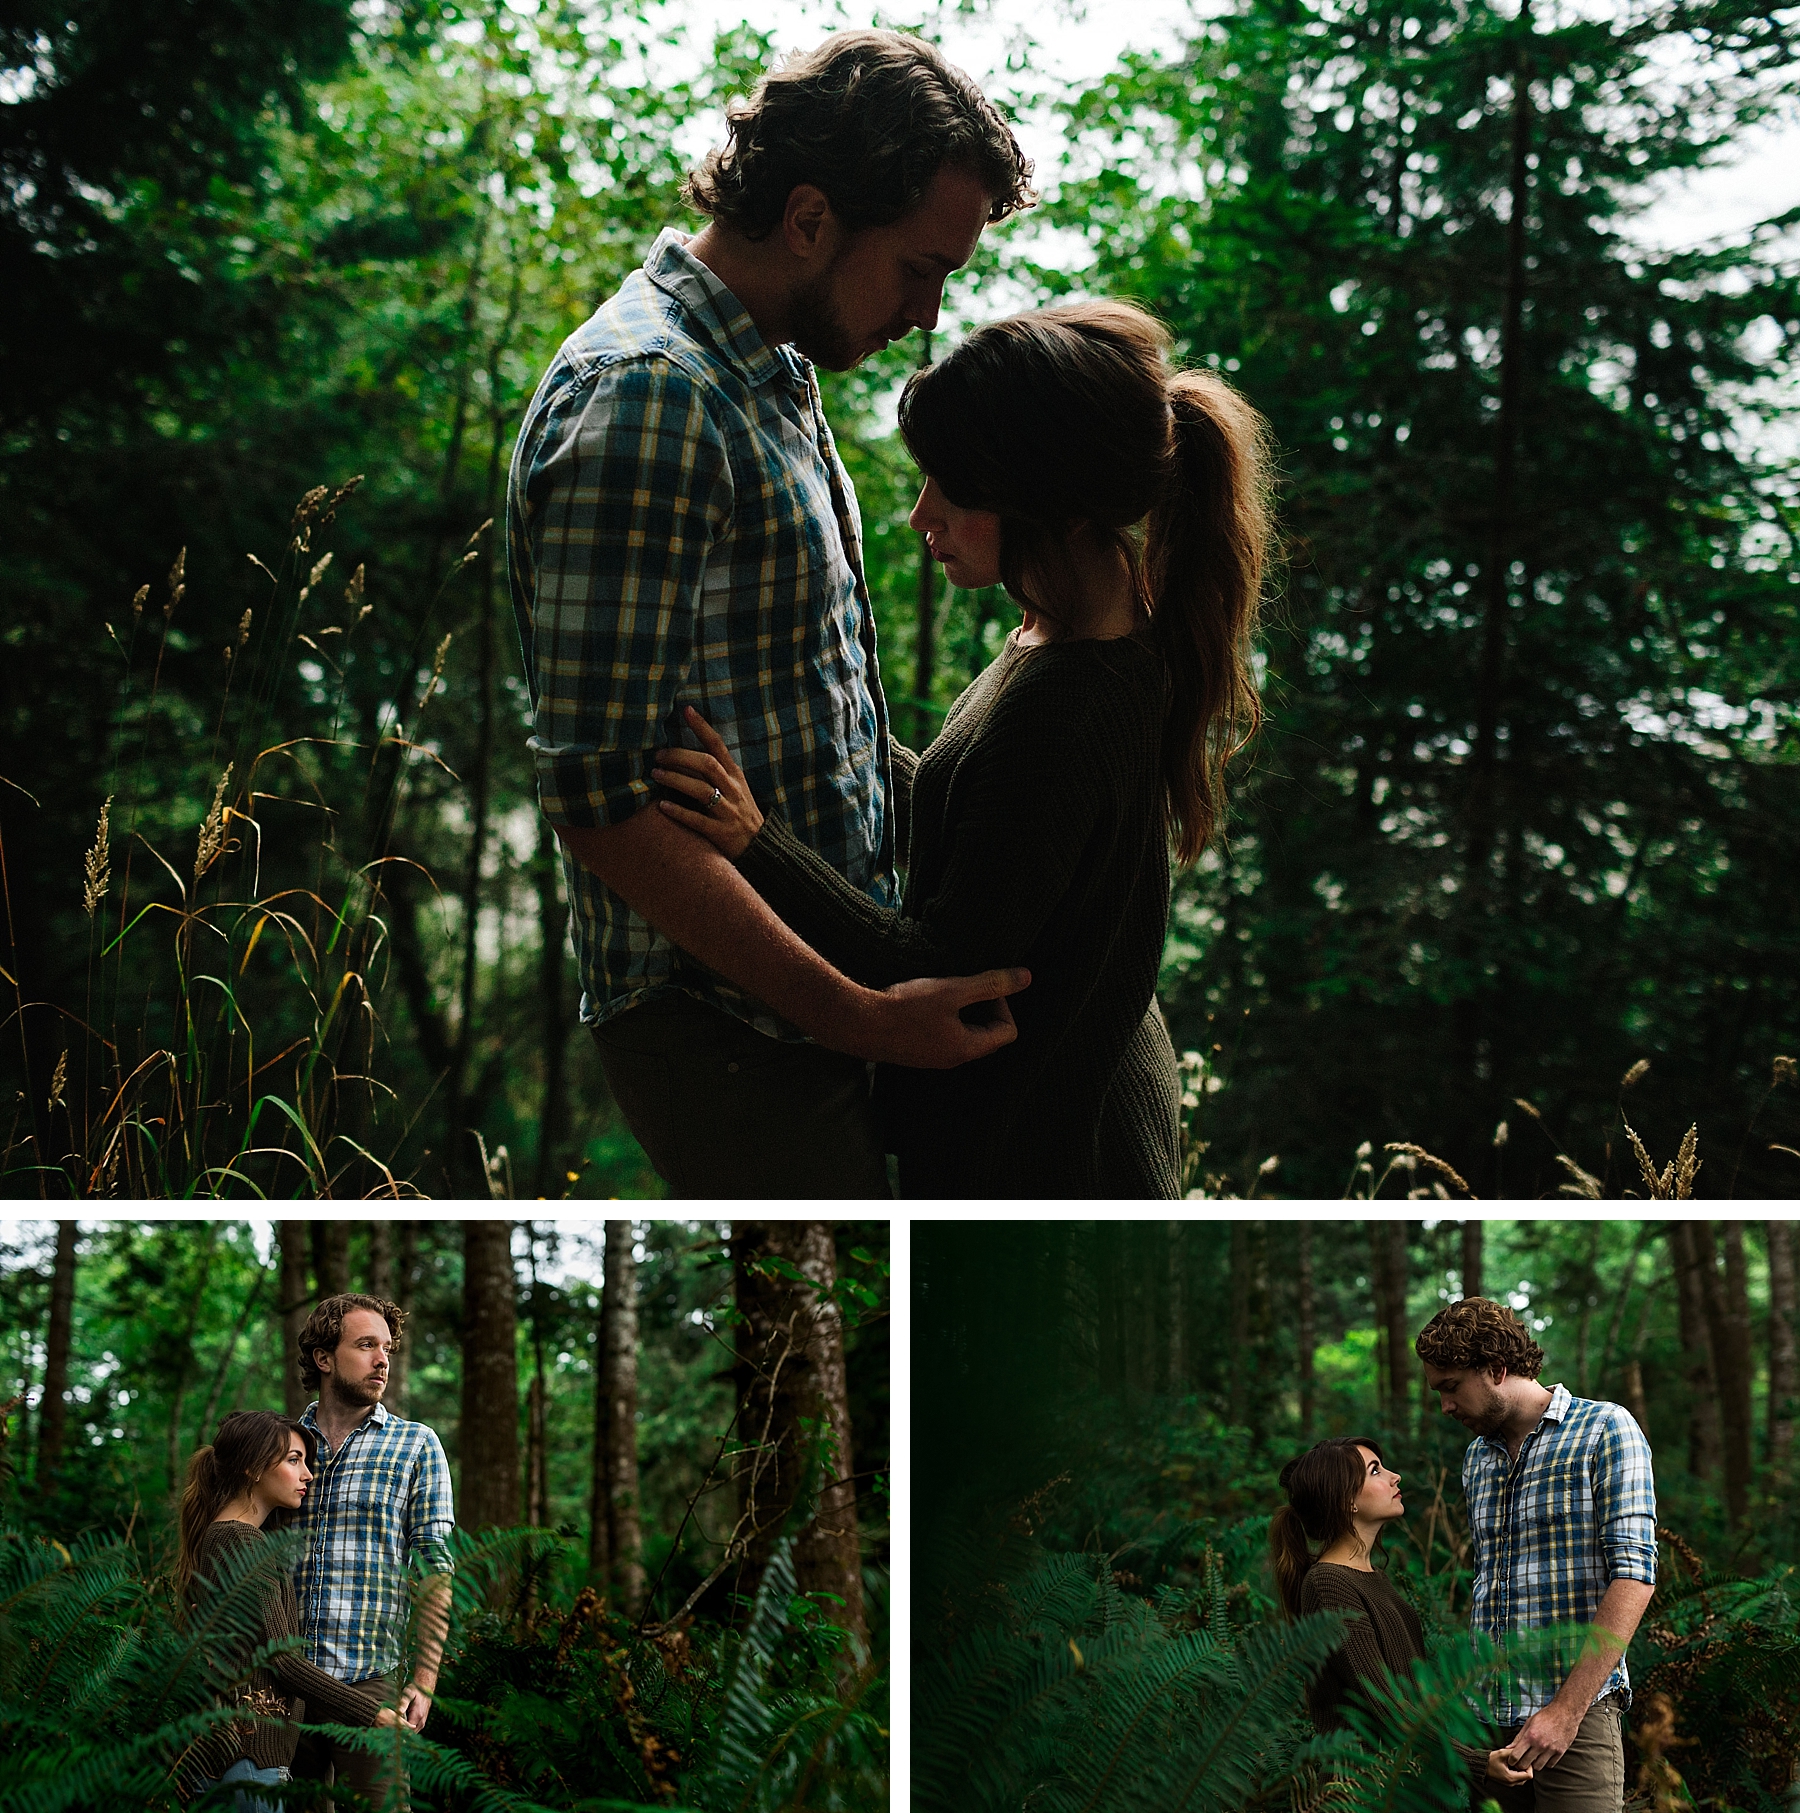 Ashlie & Bryon's Northern California Beach Engagement Session